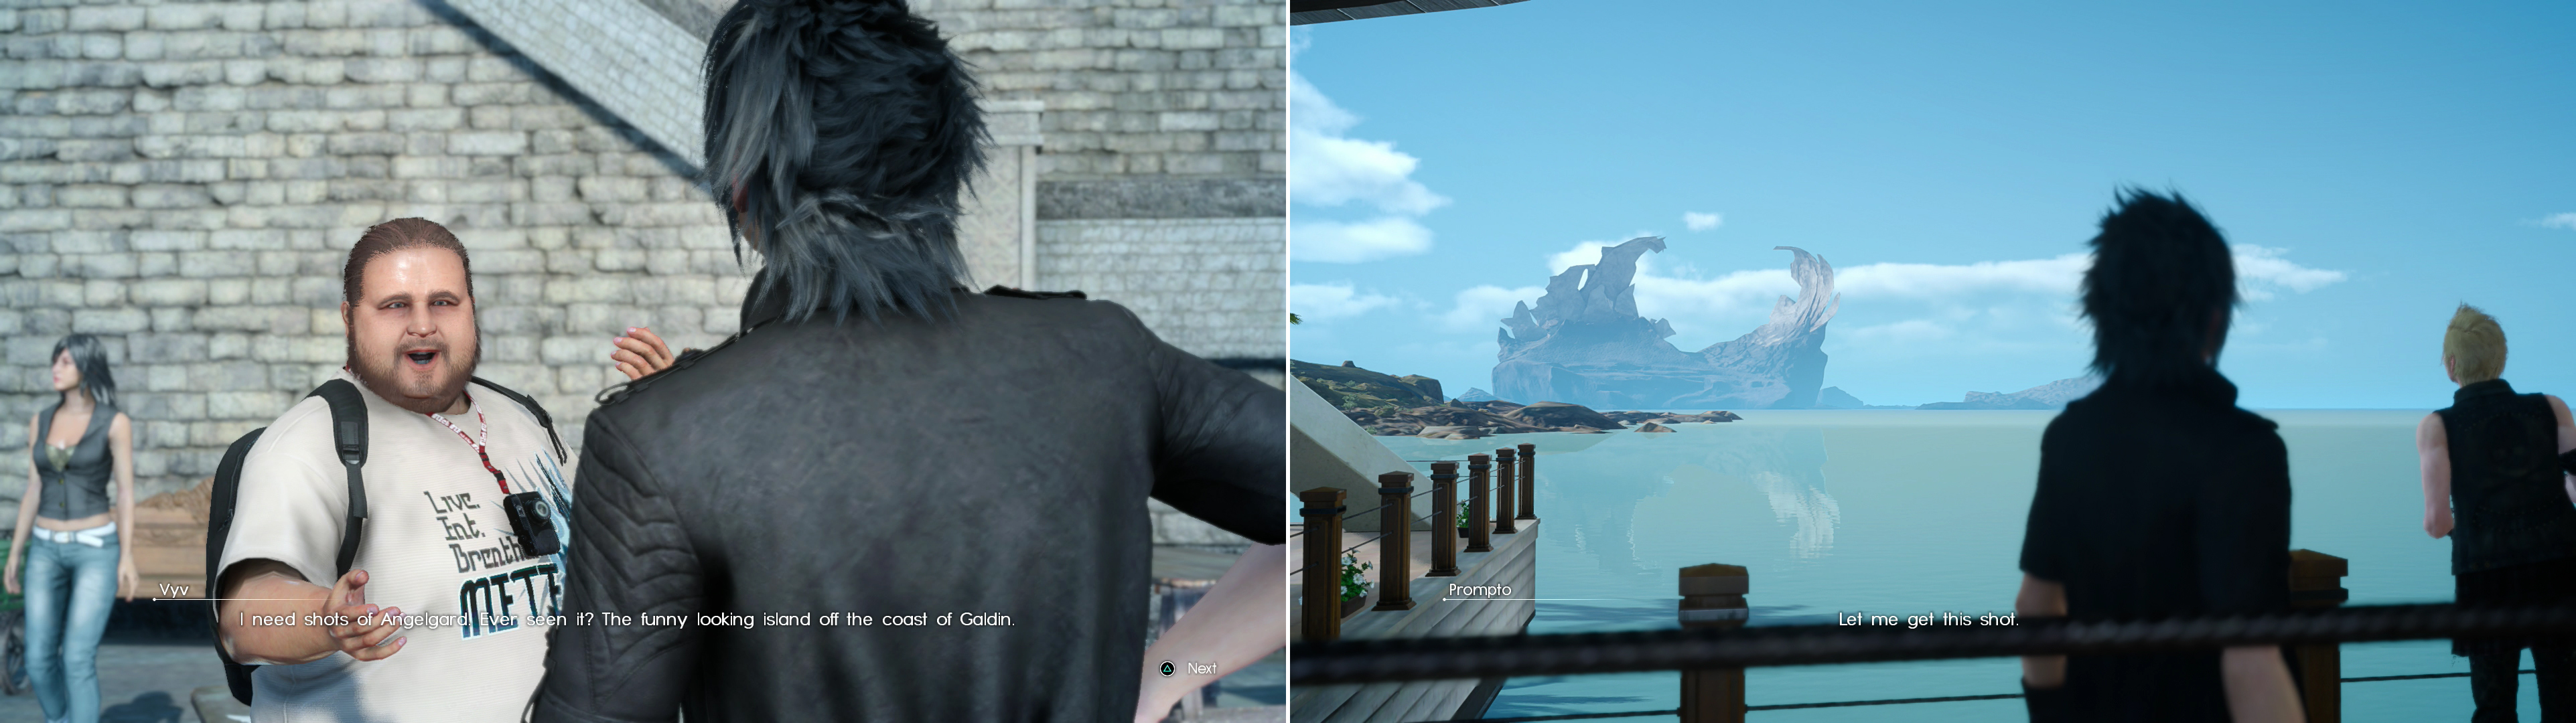 One of the landscapes Vyv wants you to take photos of is an island off the coast of Galdin Quay (left). Find one of the two photo spots in the Galdin Quay resort which provides a view Vyv will approve of (right).